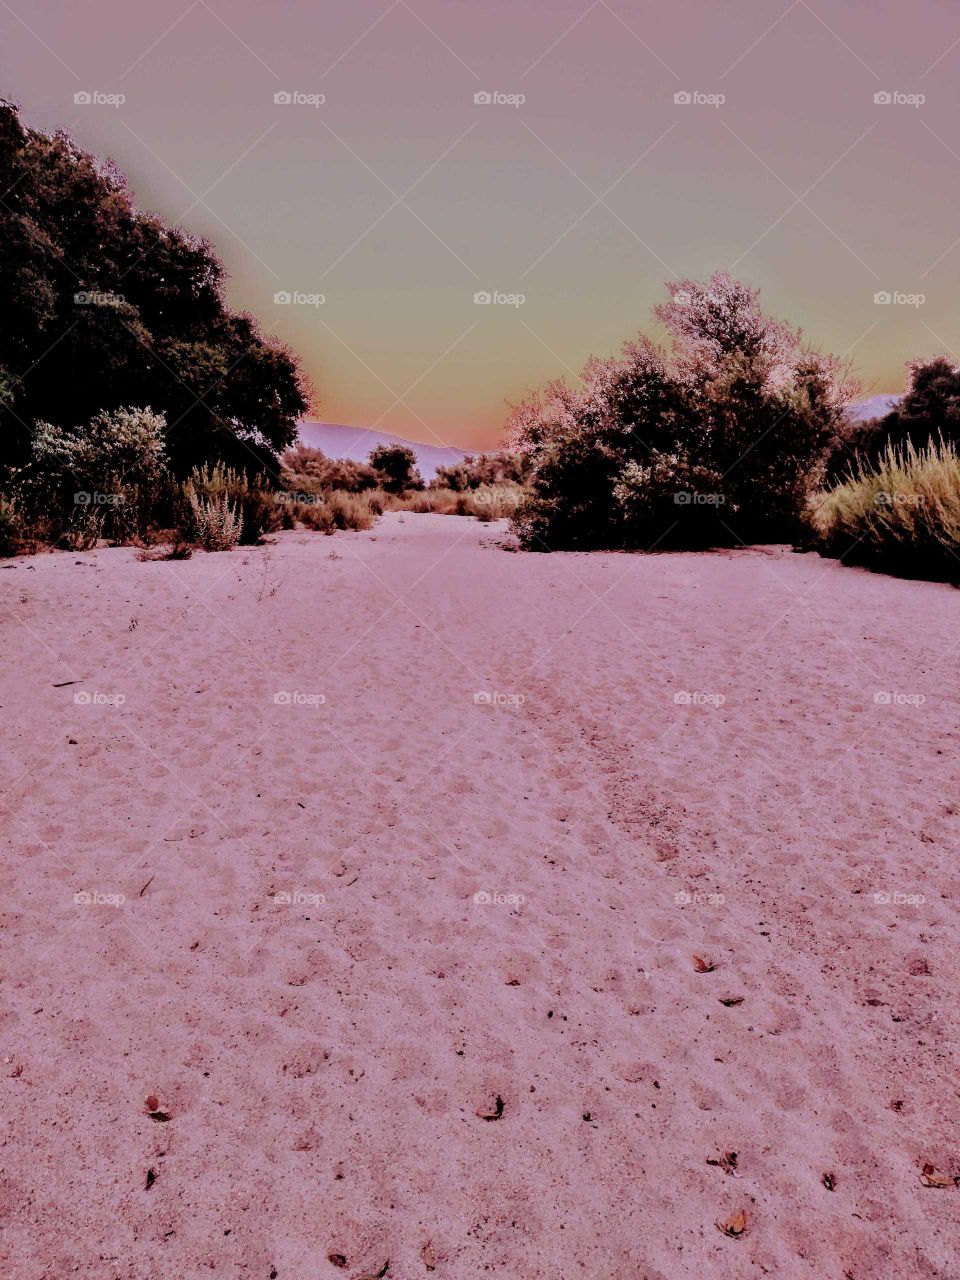 on a walking path in Temecula California color change on this picture